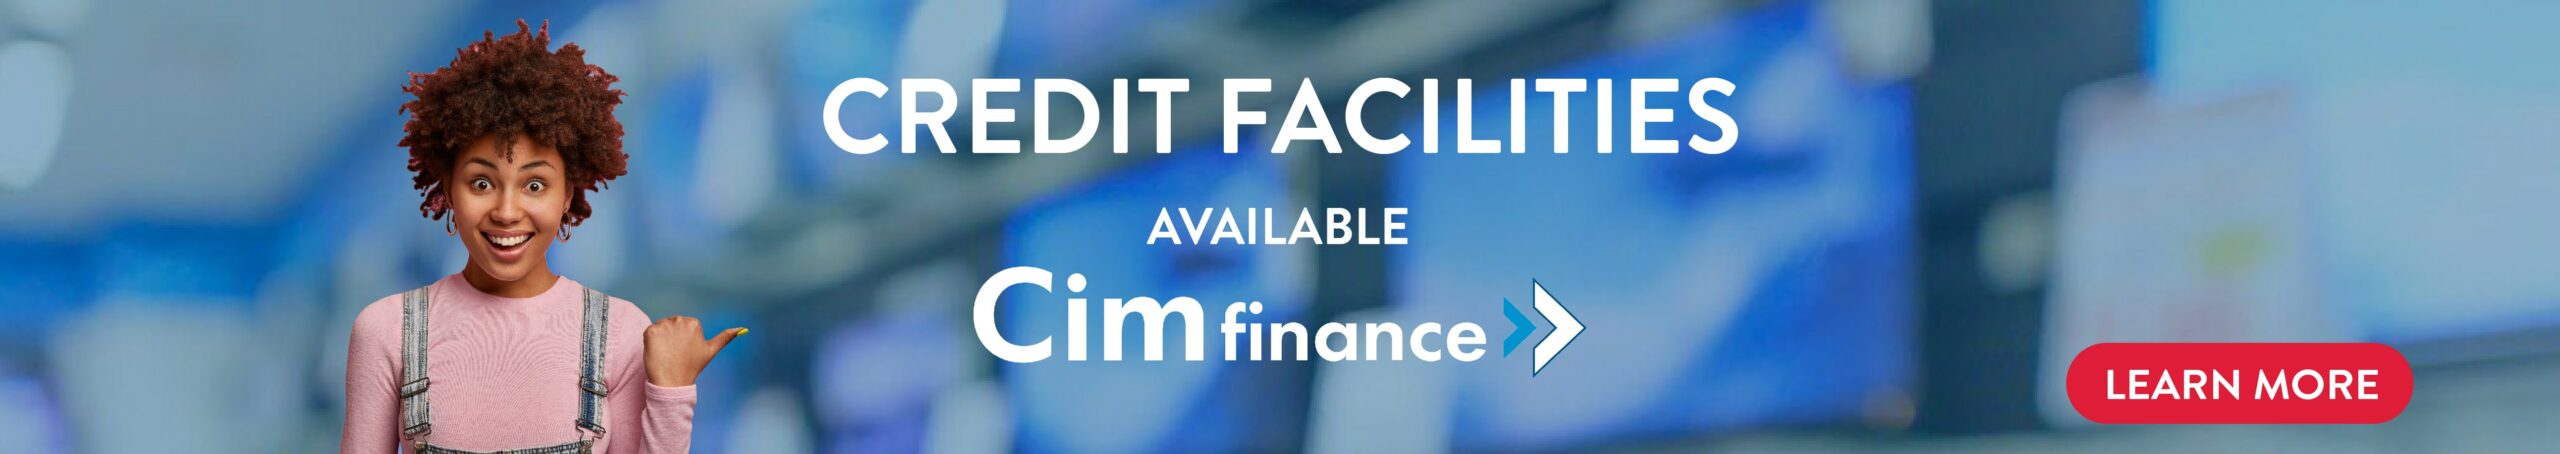 CIM Finance Electronics and appliances Go Delivery Mauritius Credit payment